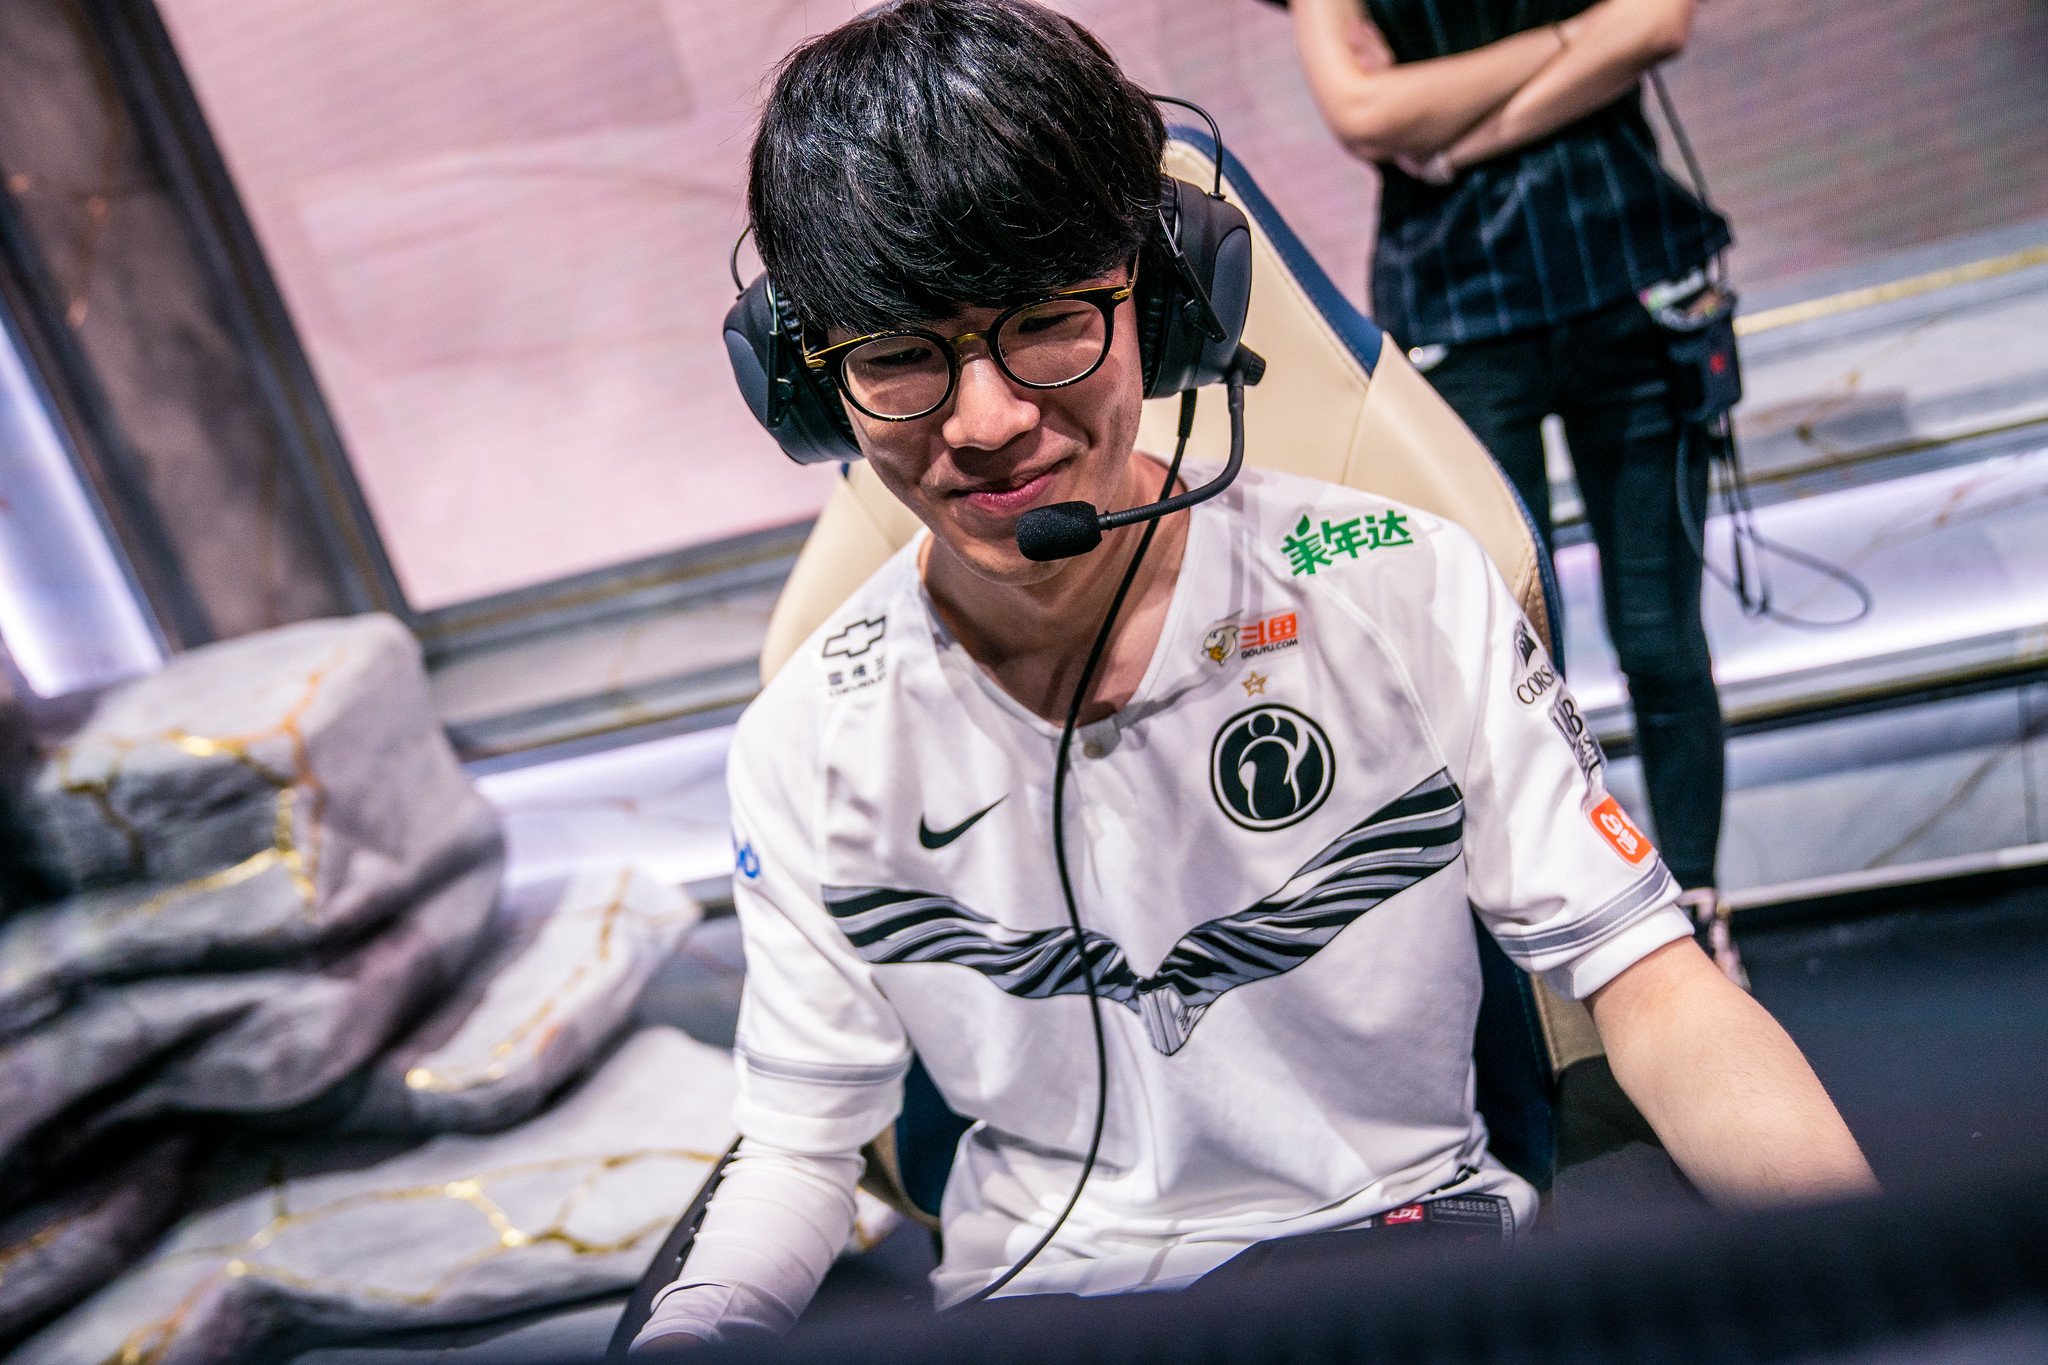 FPX on X: FunPlus Phoenix is your League of Legends 2019 World